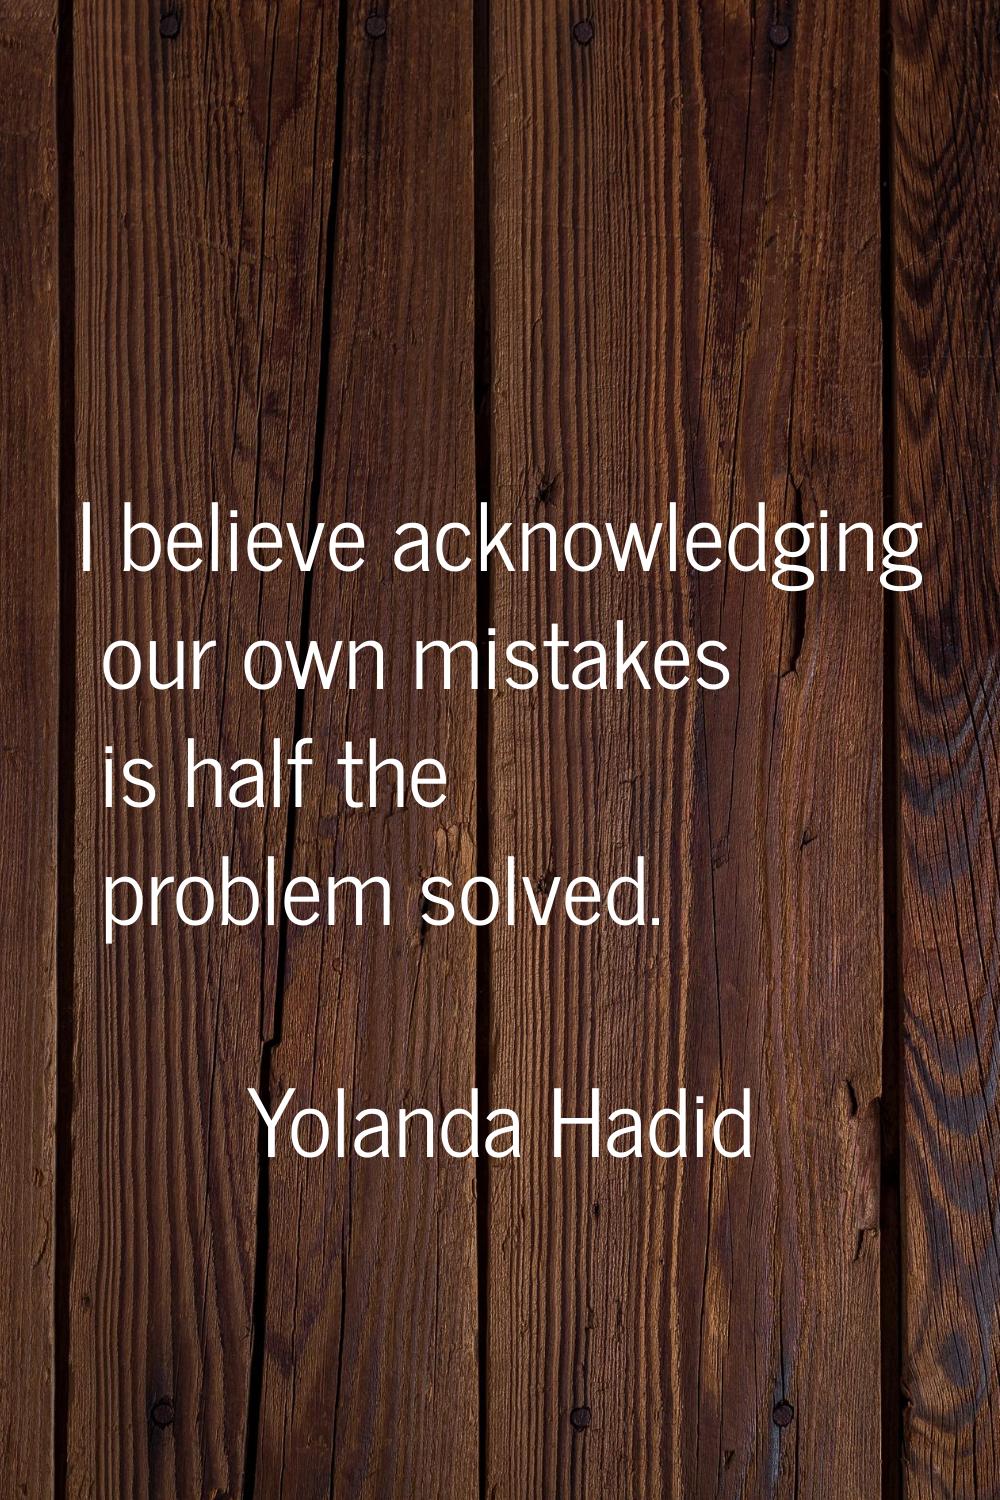 I believe acknowledging our own mistakes is half the problem solved.